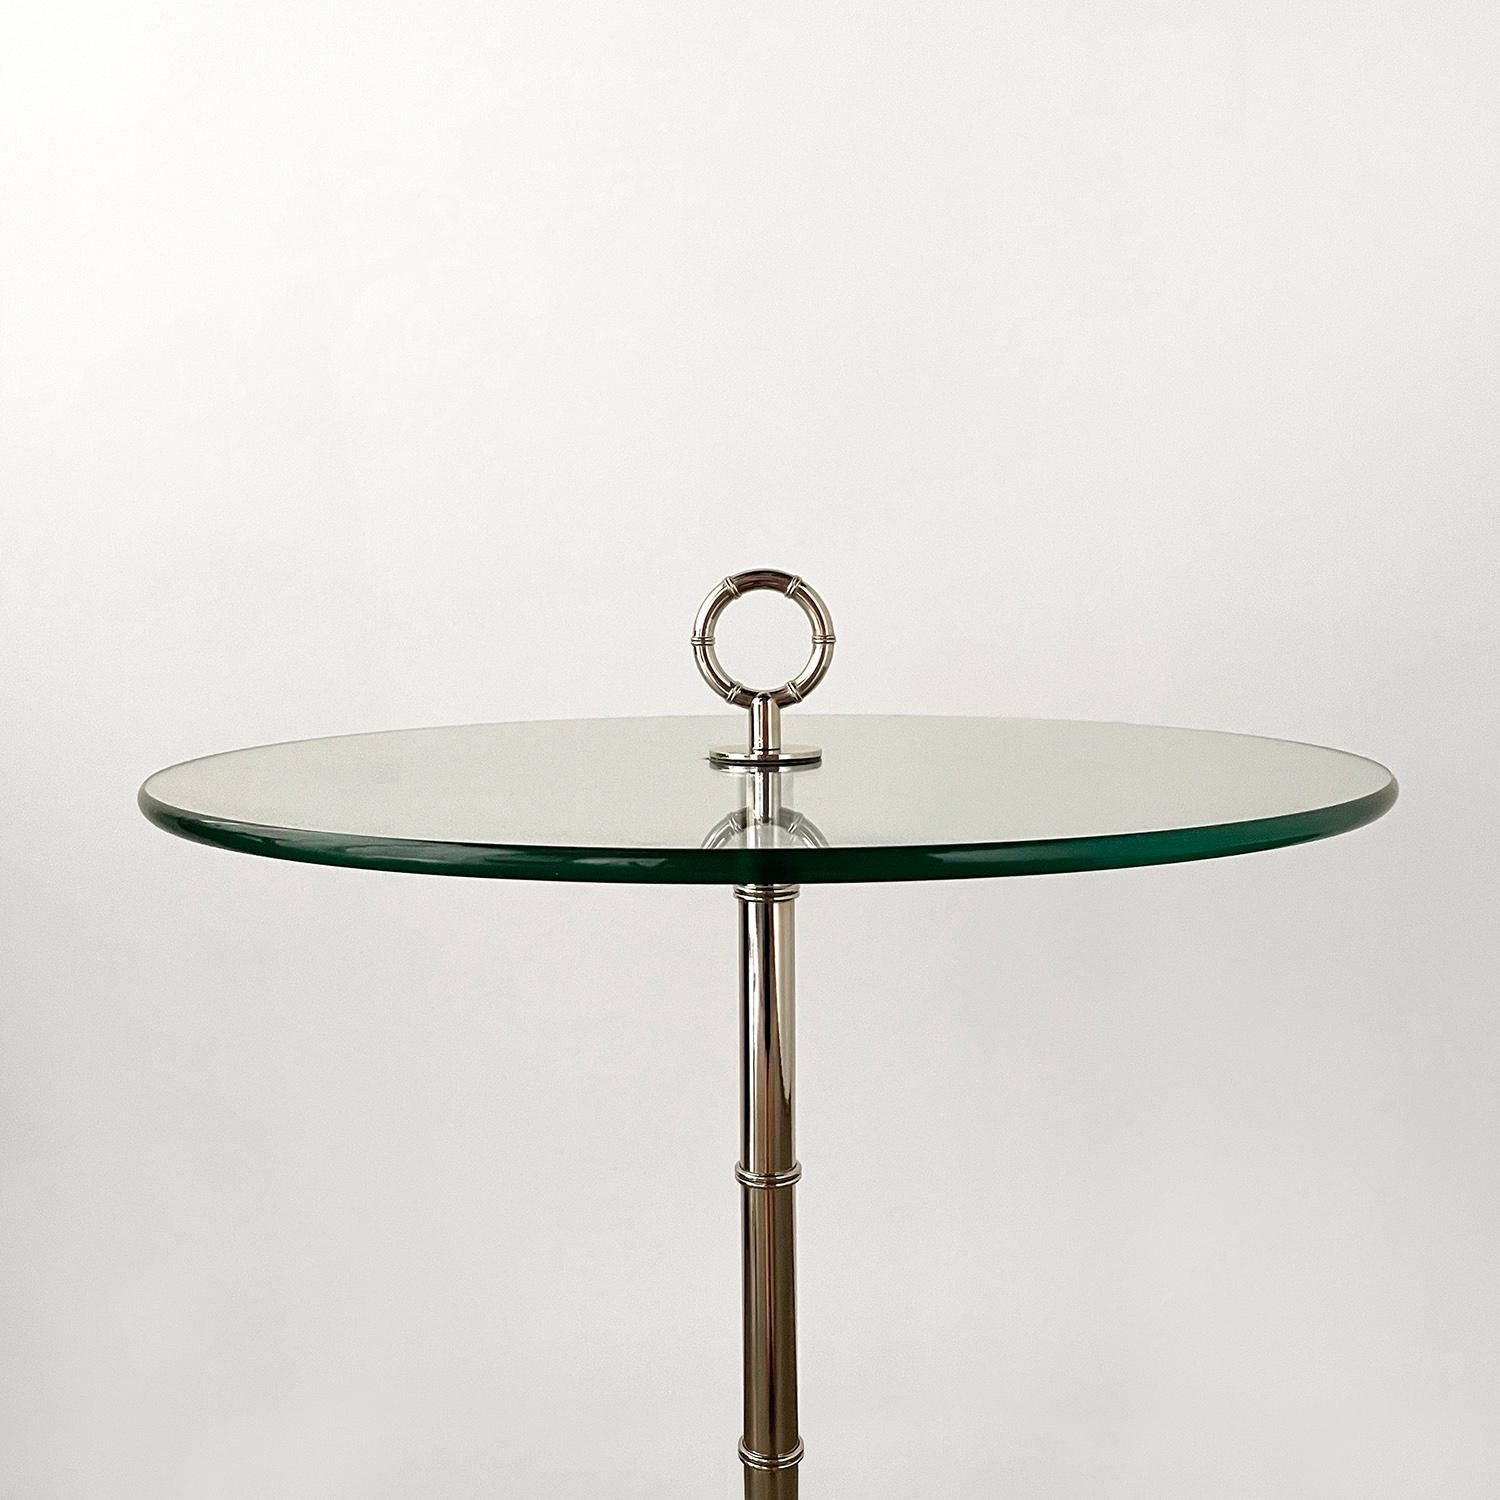 Italian cocktail table in the style of Cesare Lacca 
Floating glass top with heavy weight tripod base and loop detail
Glass has light surface markings from age and use
Beautiful and functional table.